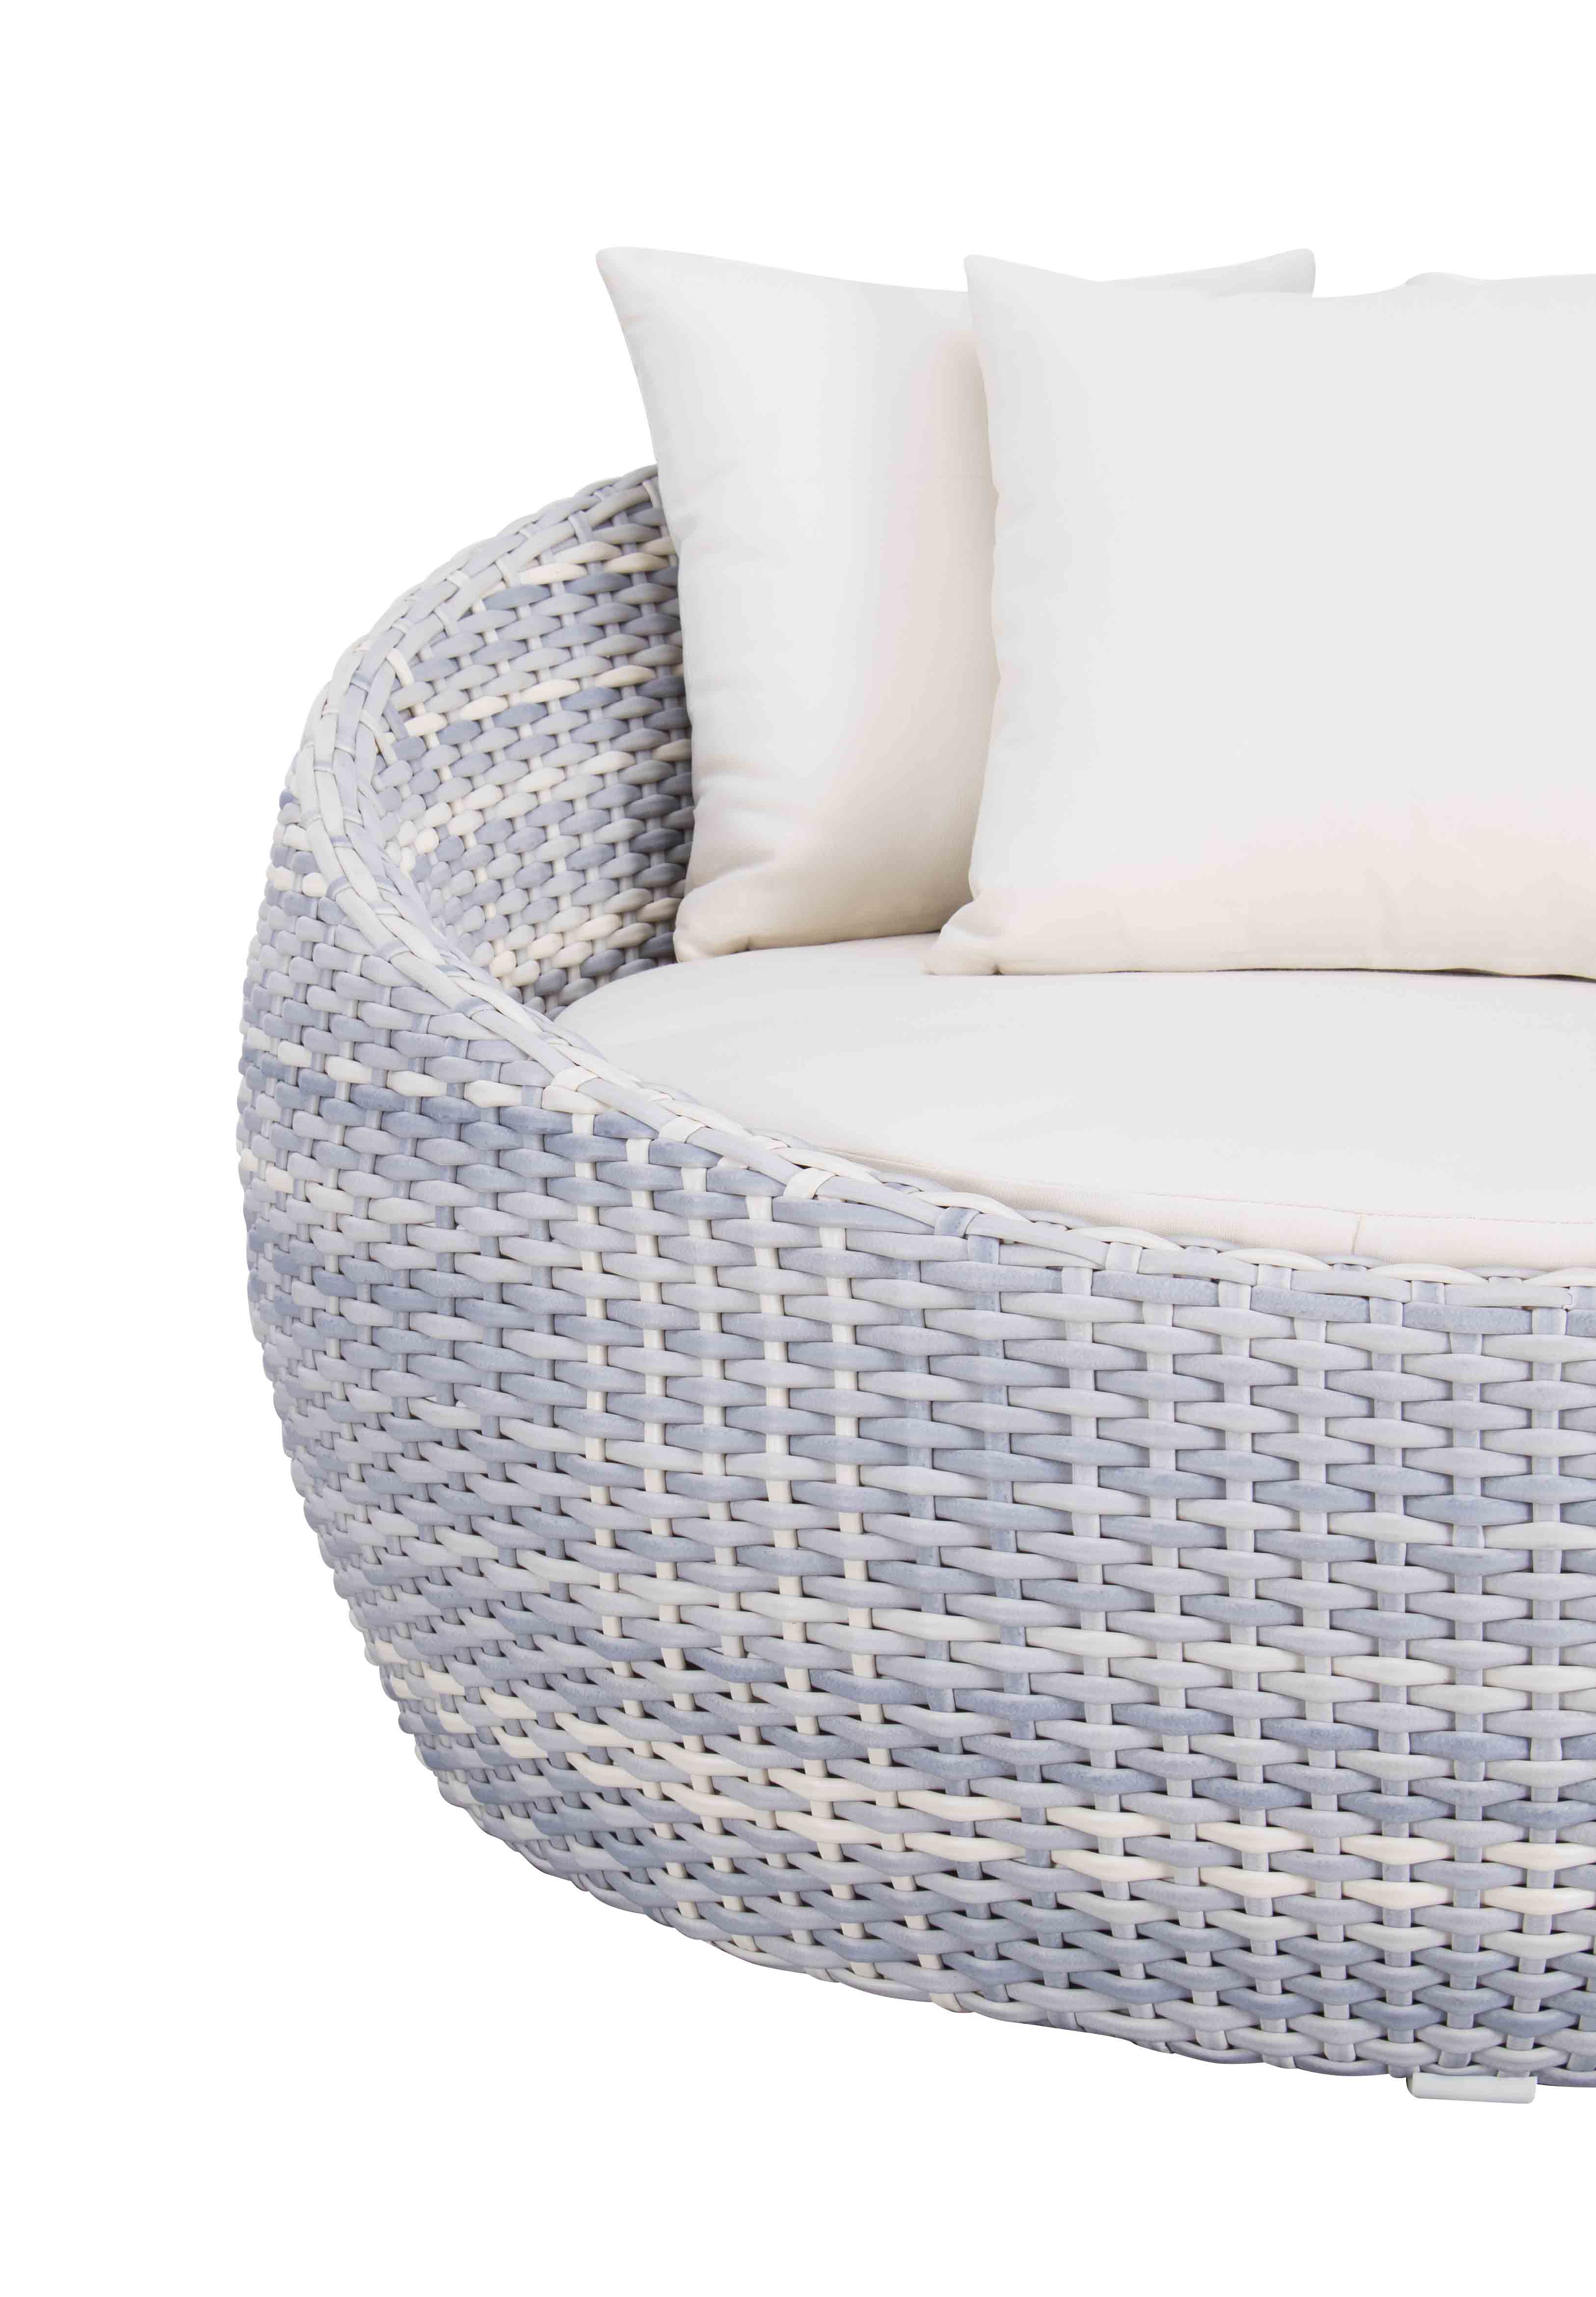 Sky rattan round daybed D4